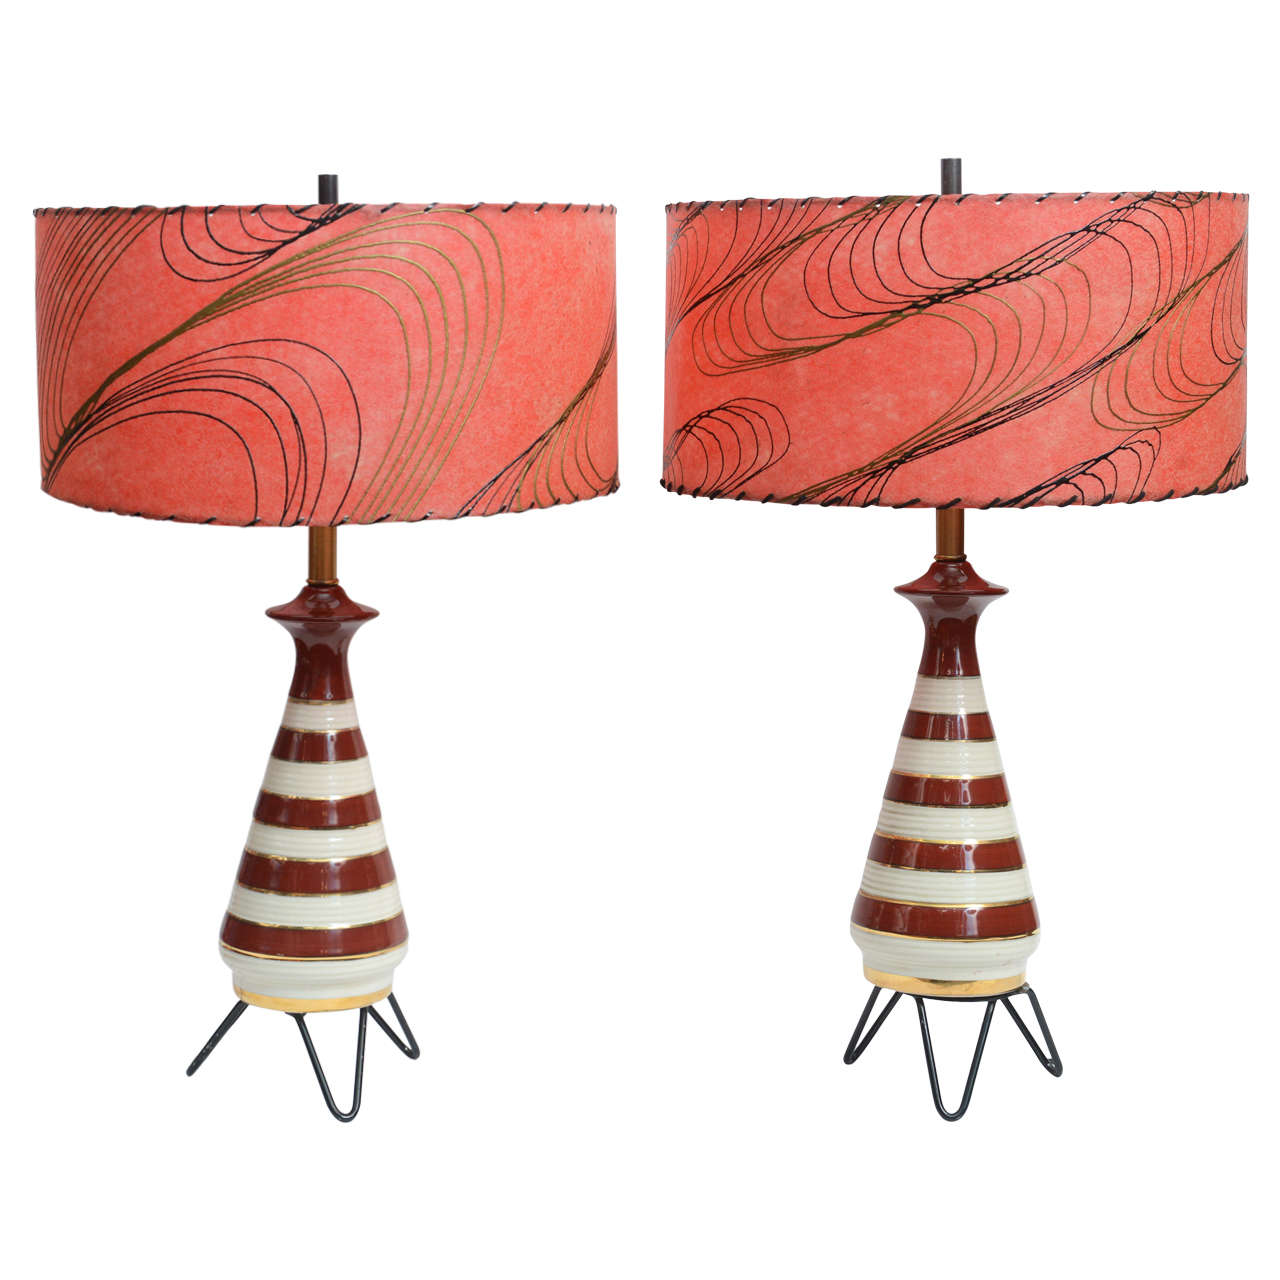 Pair of 1950s Striped Table Lamps